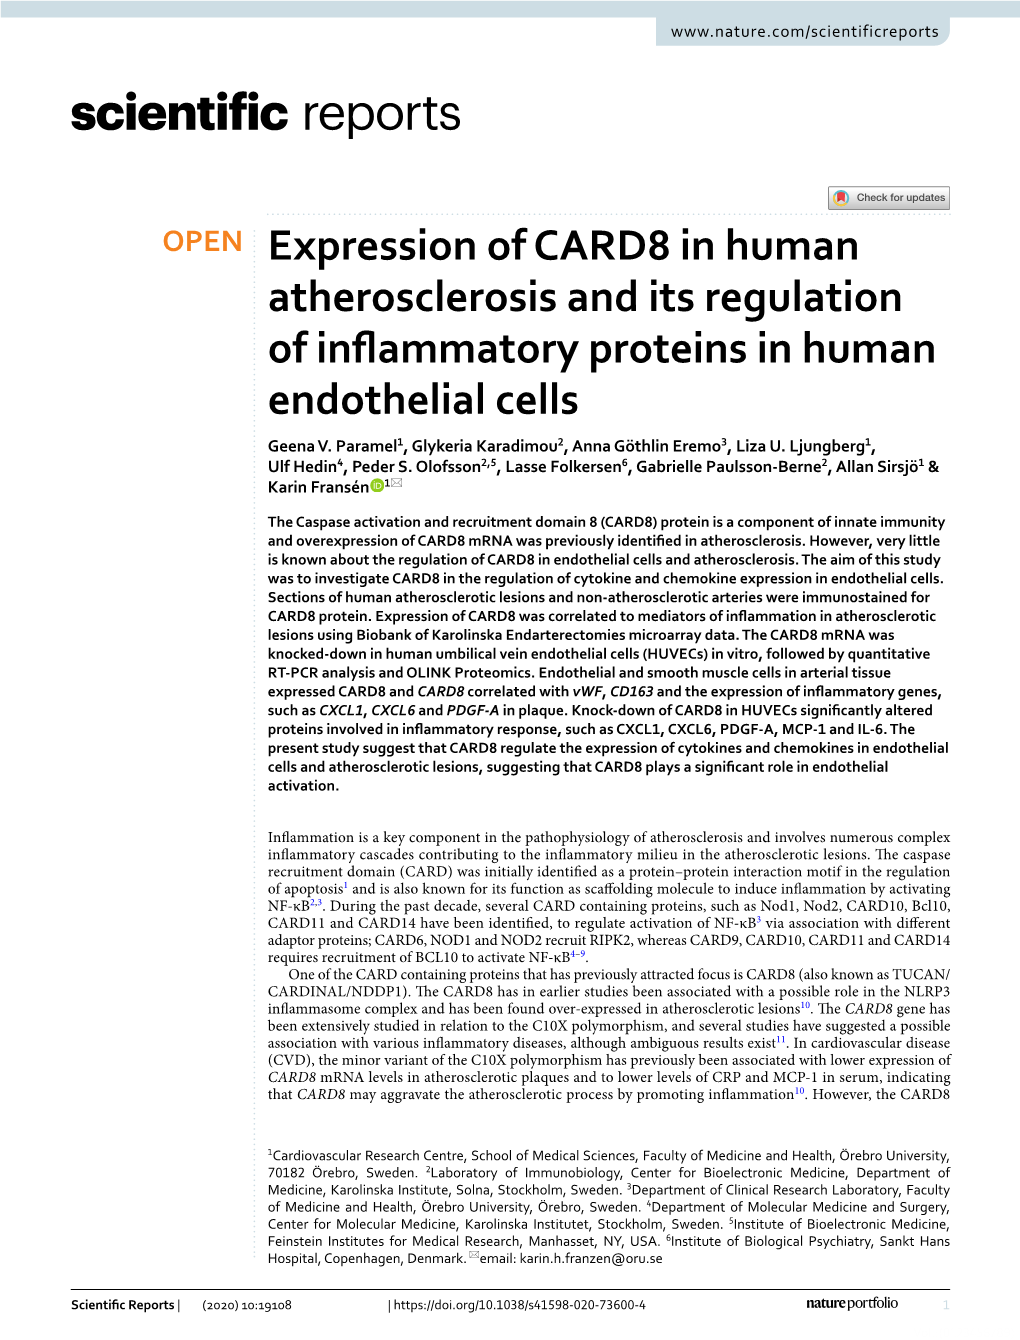 Expression of CARD8 in Human Atherosclerosis and Its Regulation of Infammatory Proteins in Human Endothelial Cells Geena V